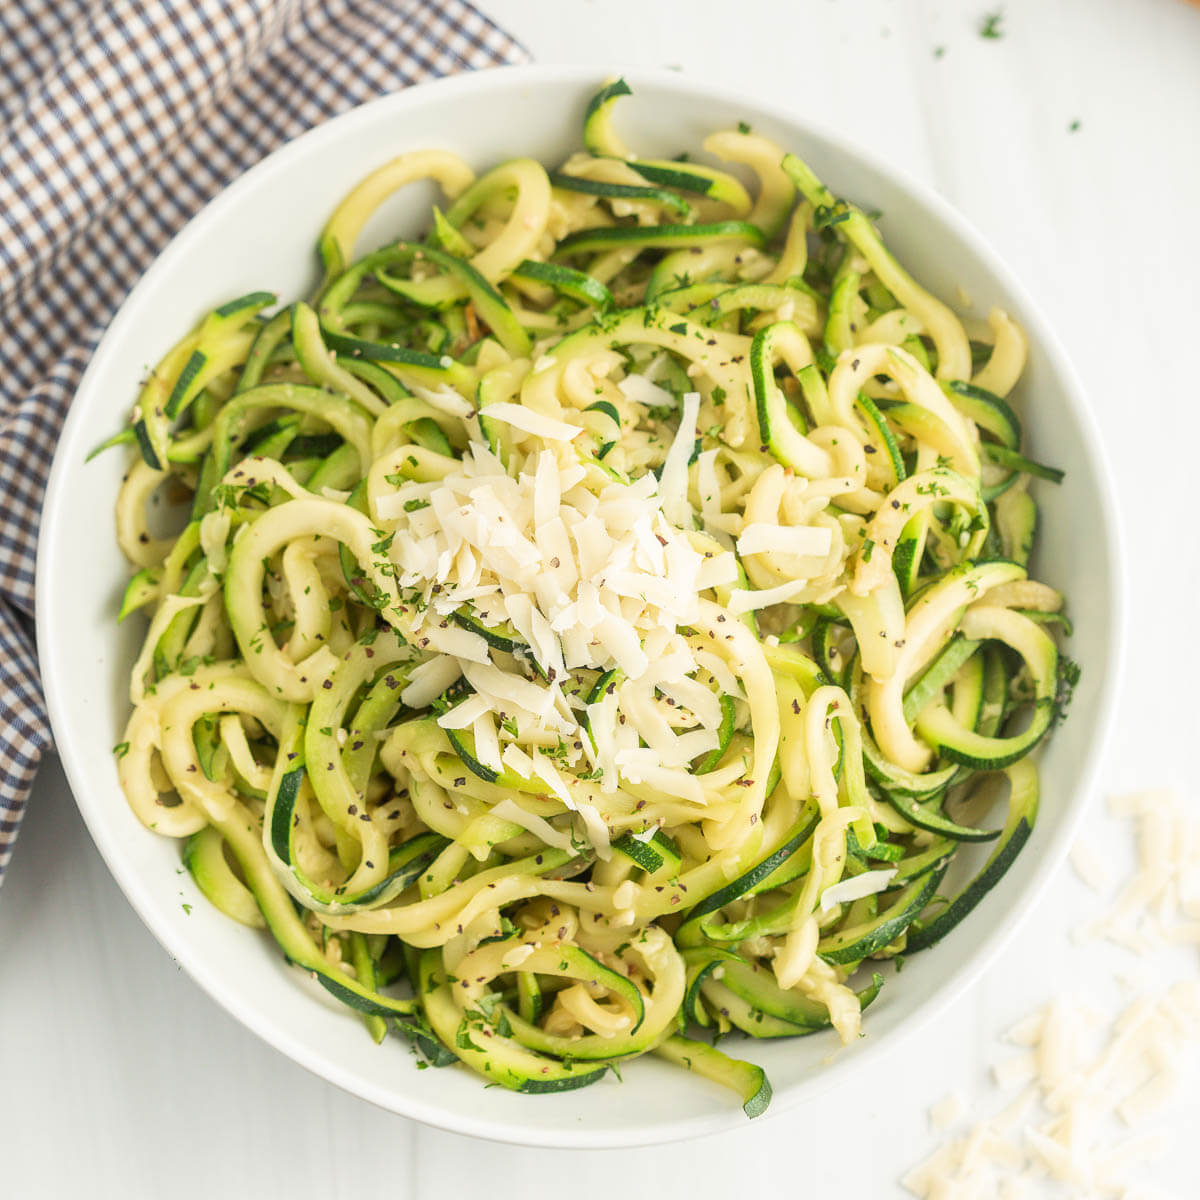 HOW TO MAKE ZUCCHINI NOODLES